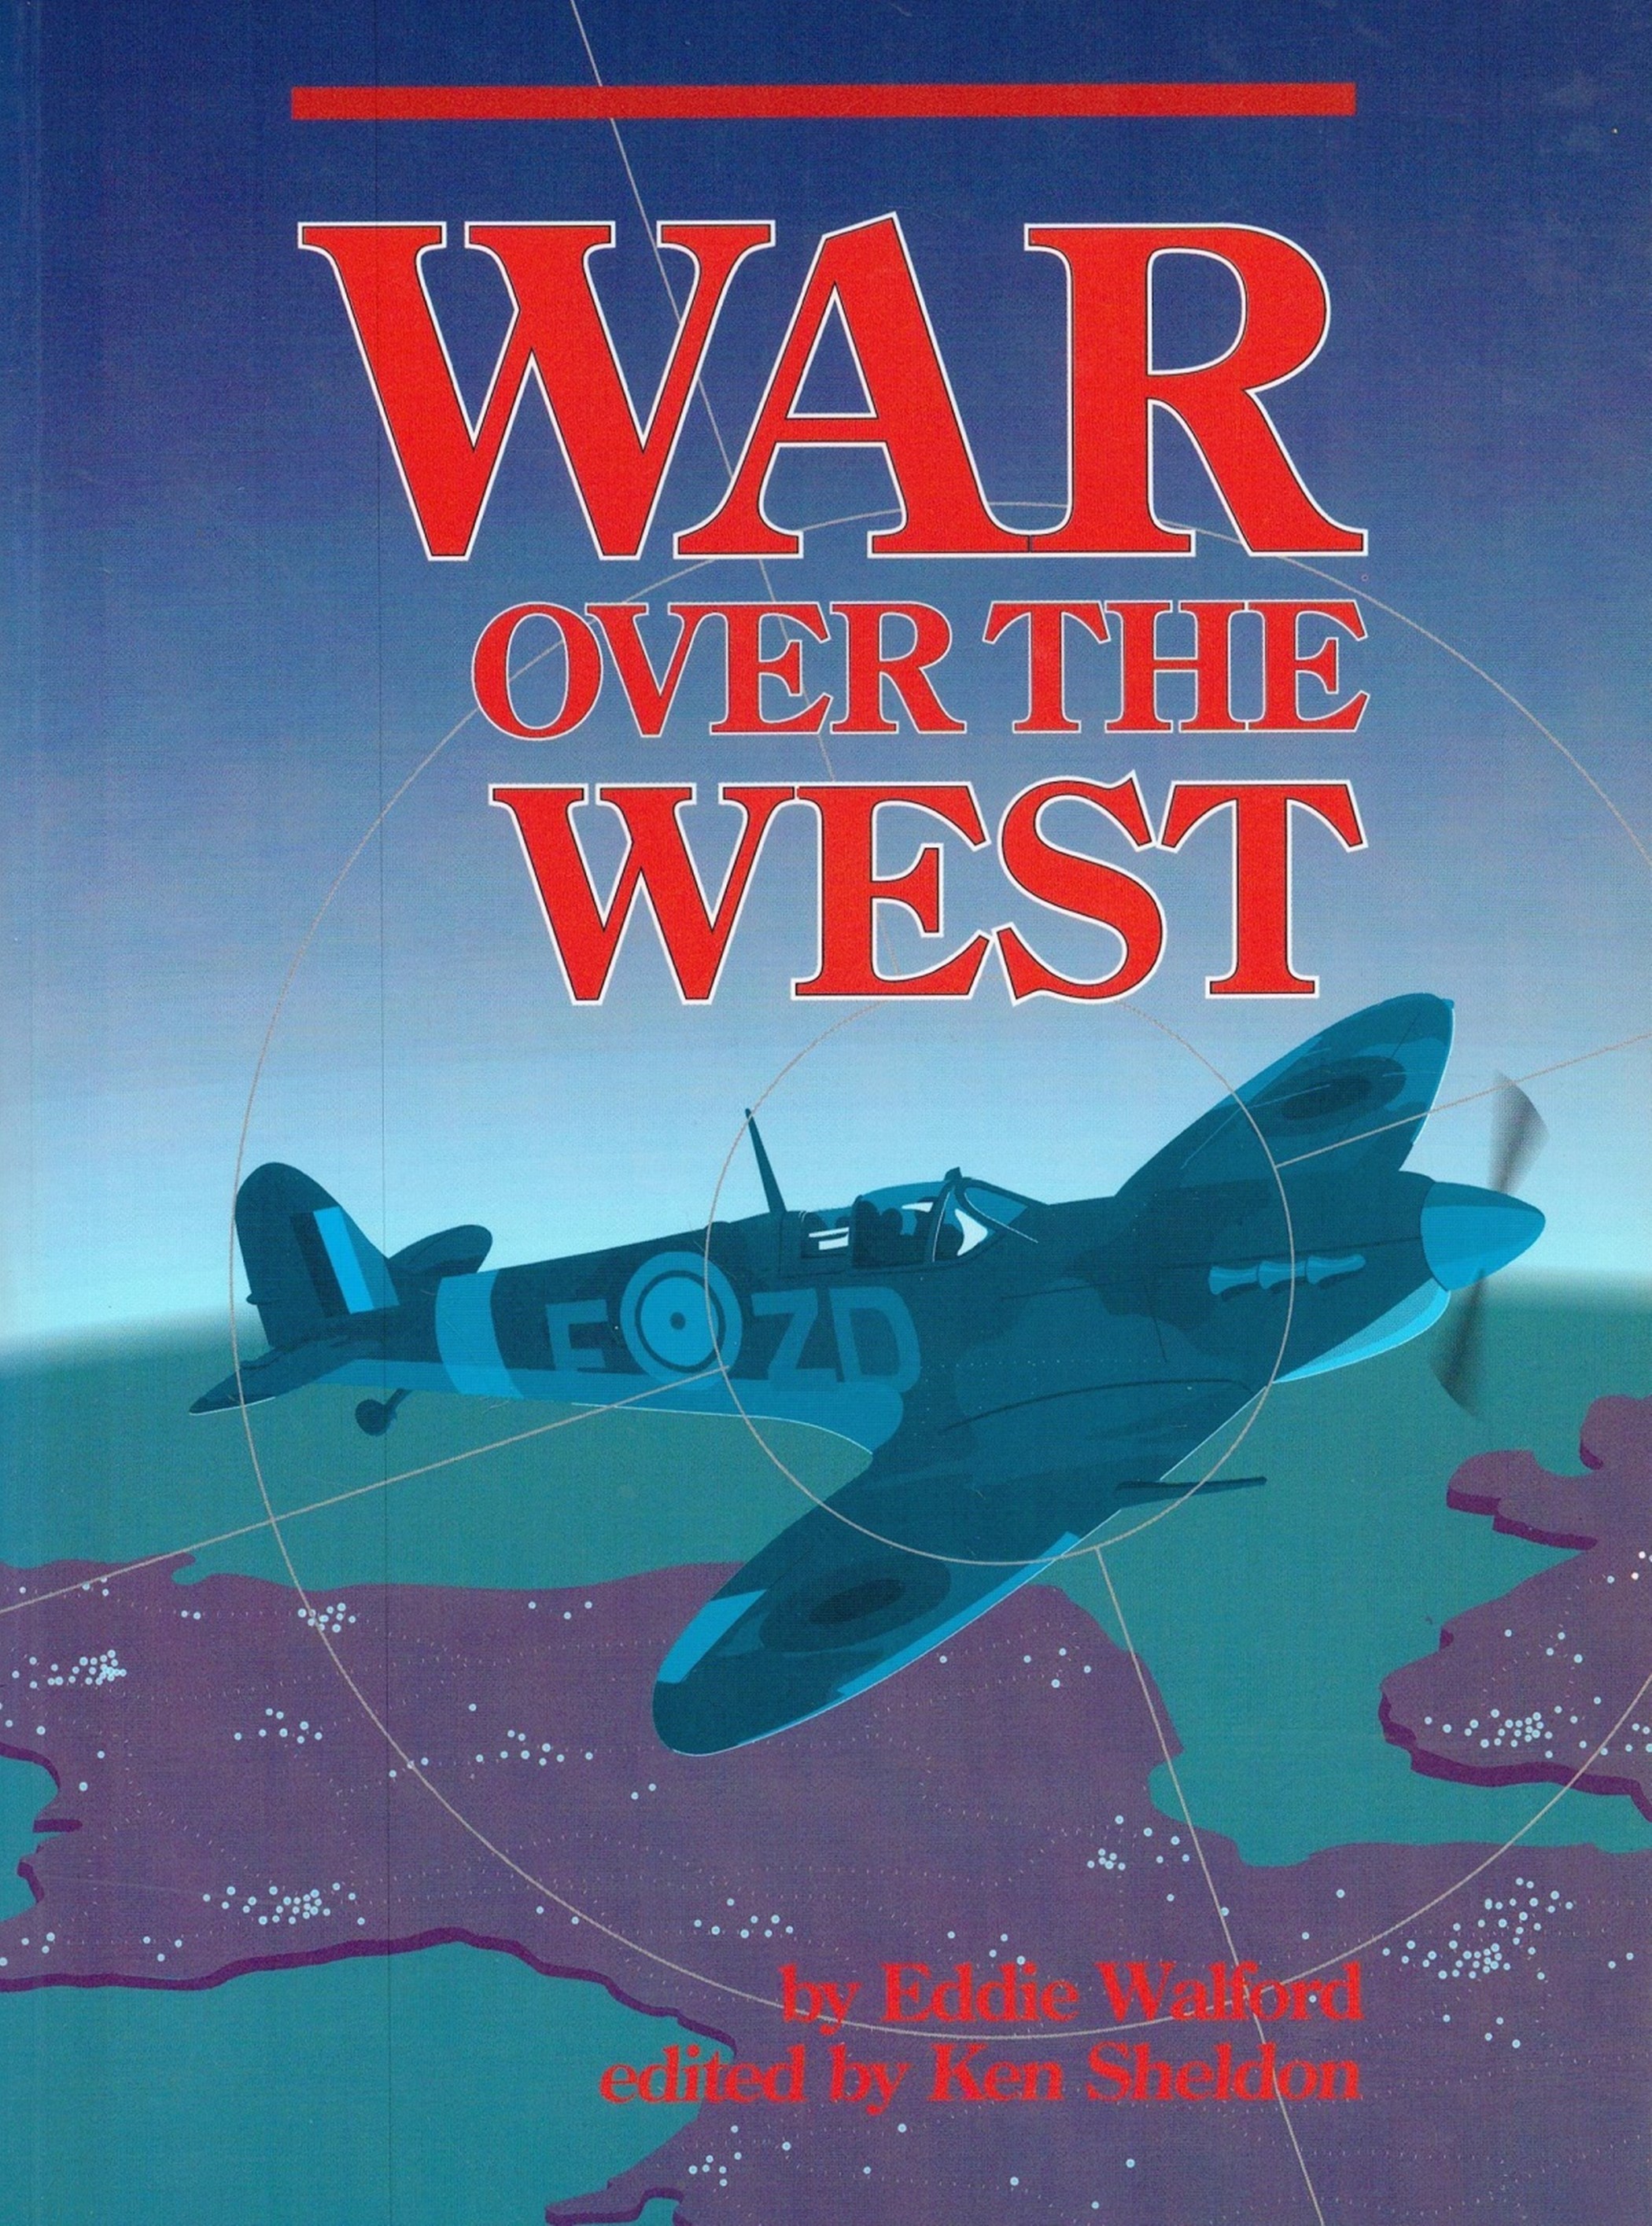 War over The West by Eddie Walford Softback Book 1989 First Edition published by Amigo Books some - Image 2 of 9